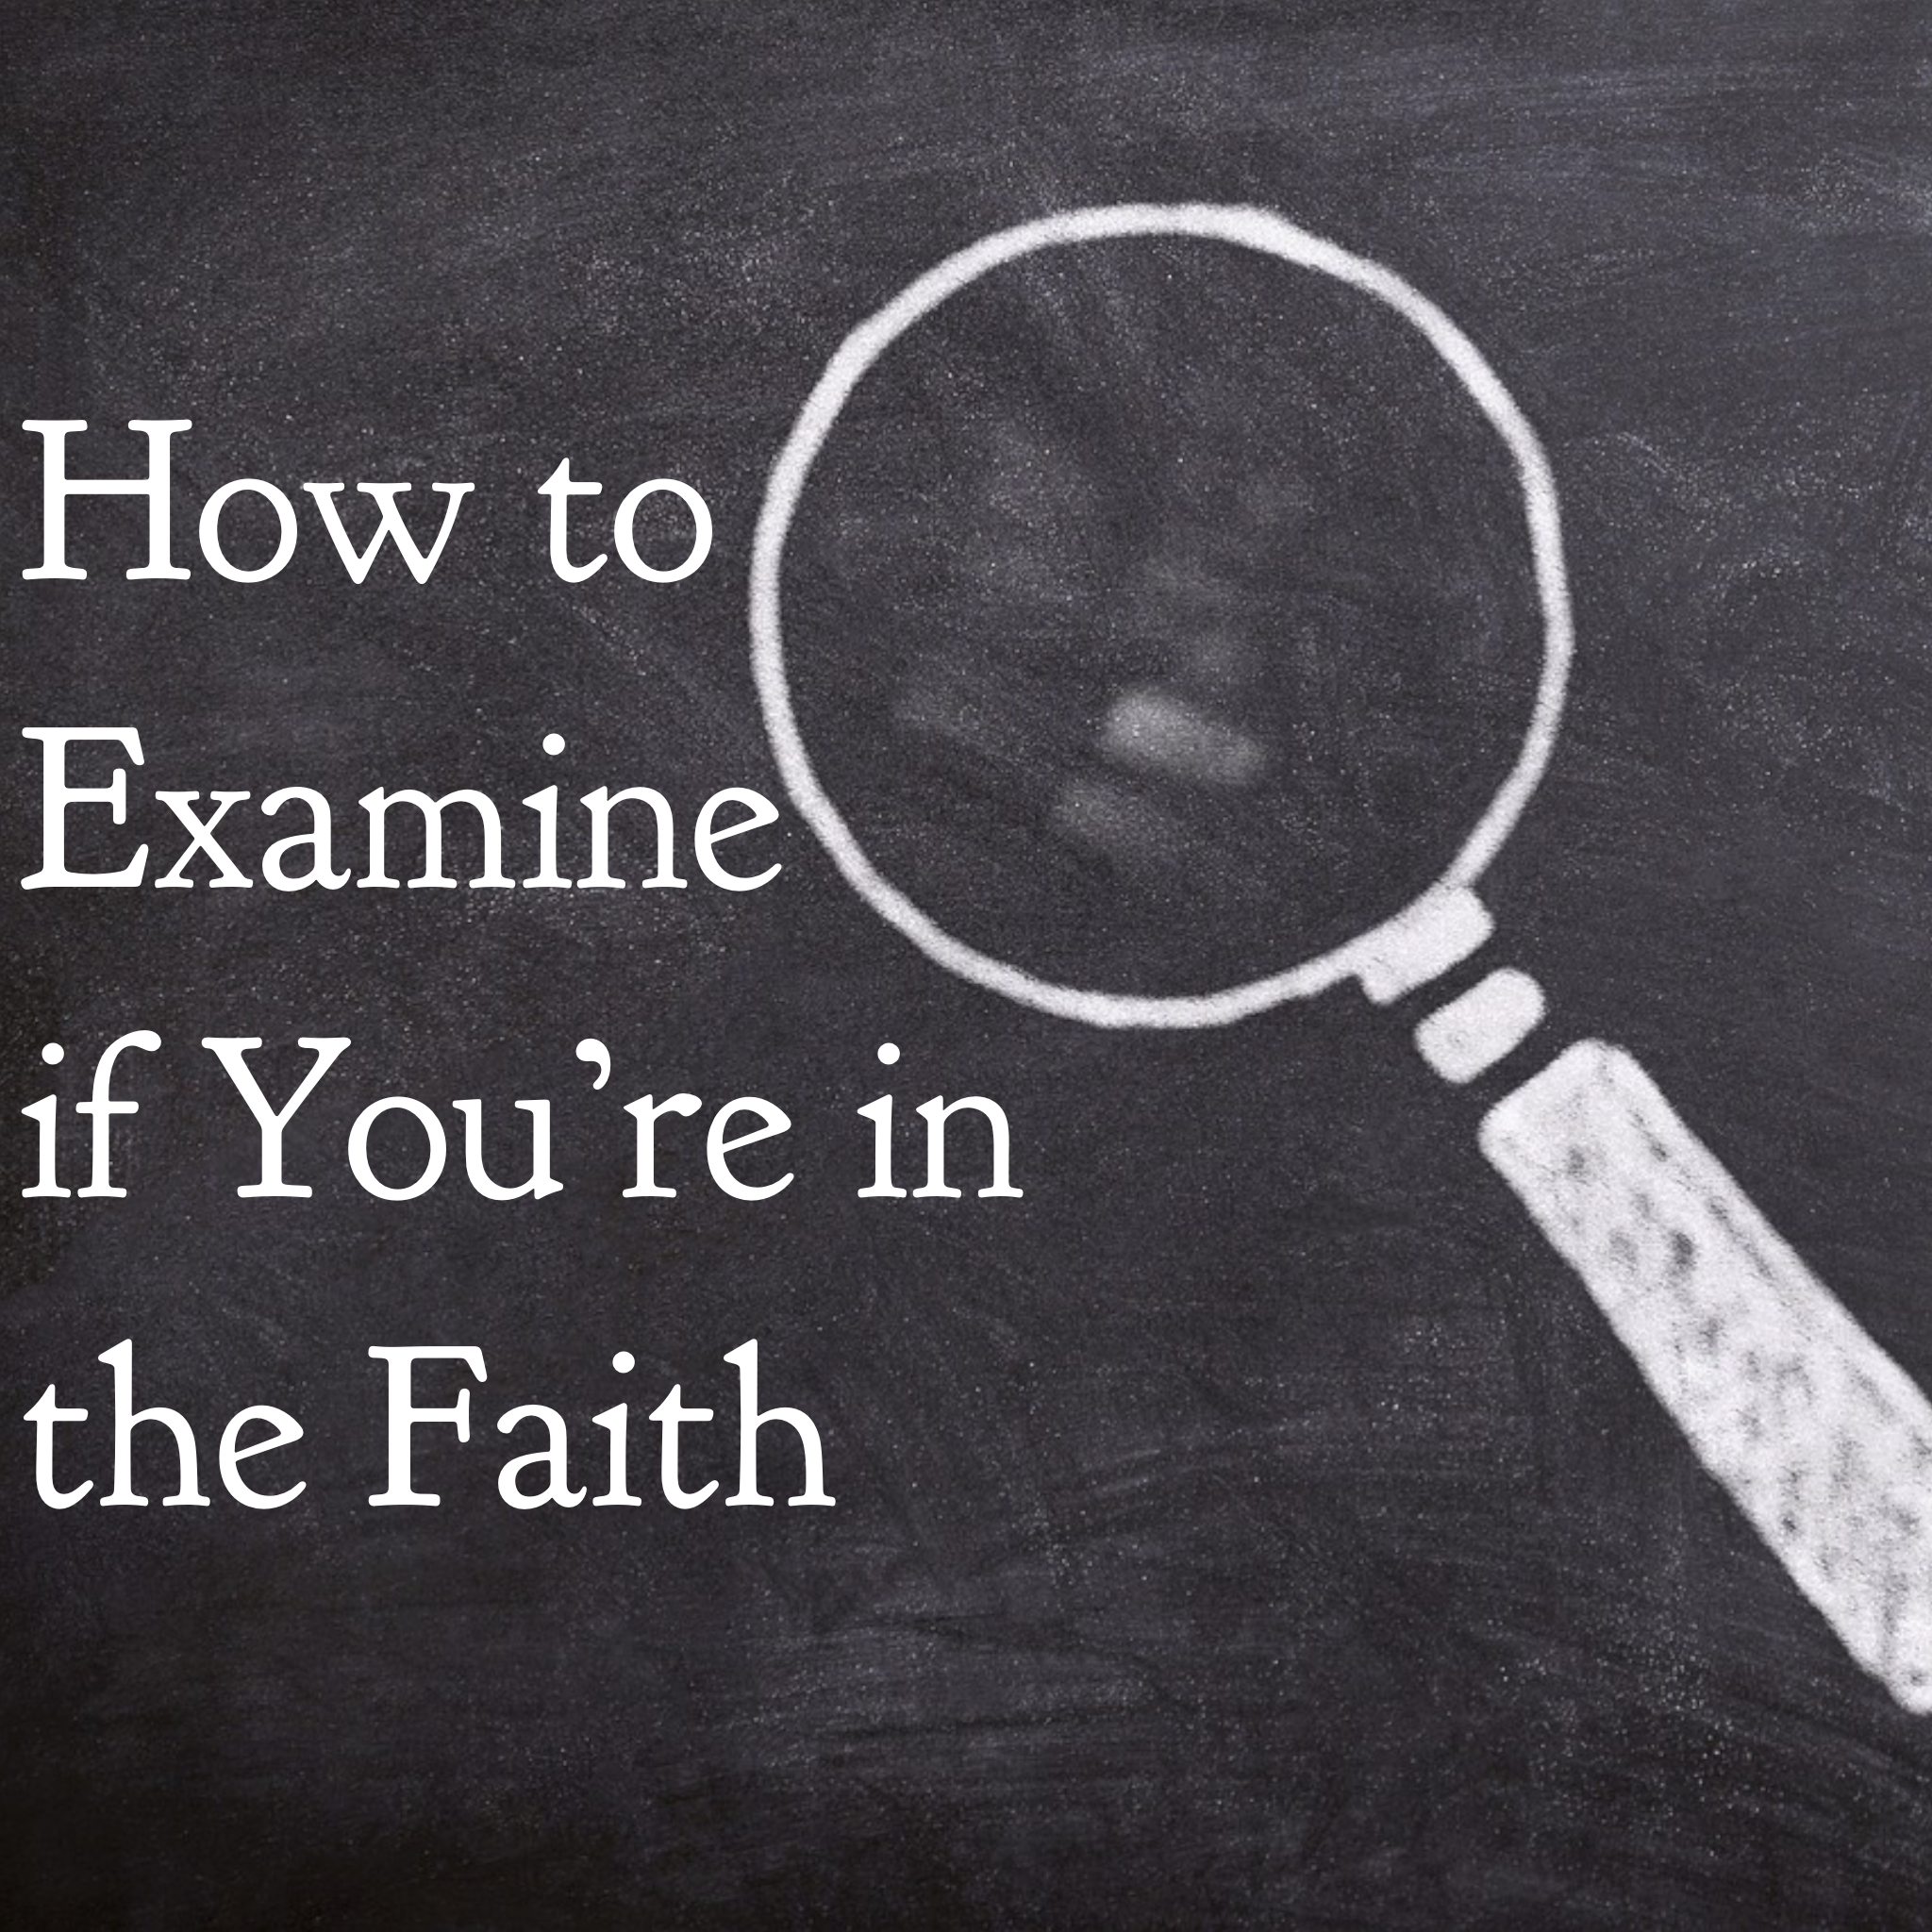 How to Examine if You're in the Faith - 11/4/22